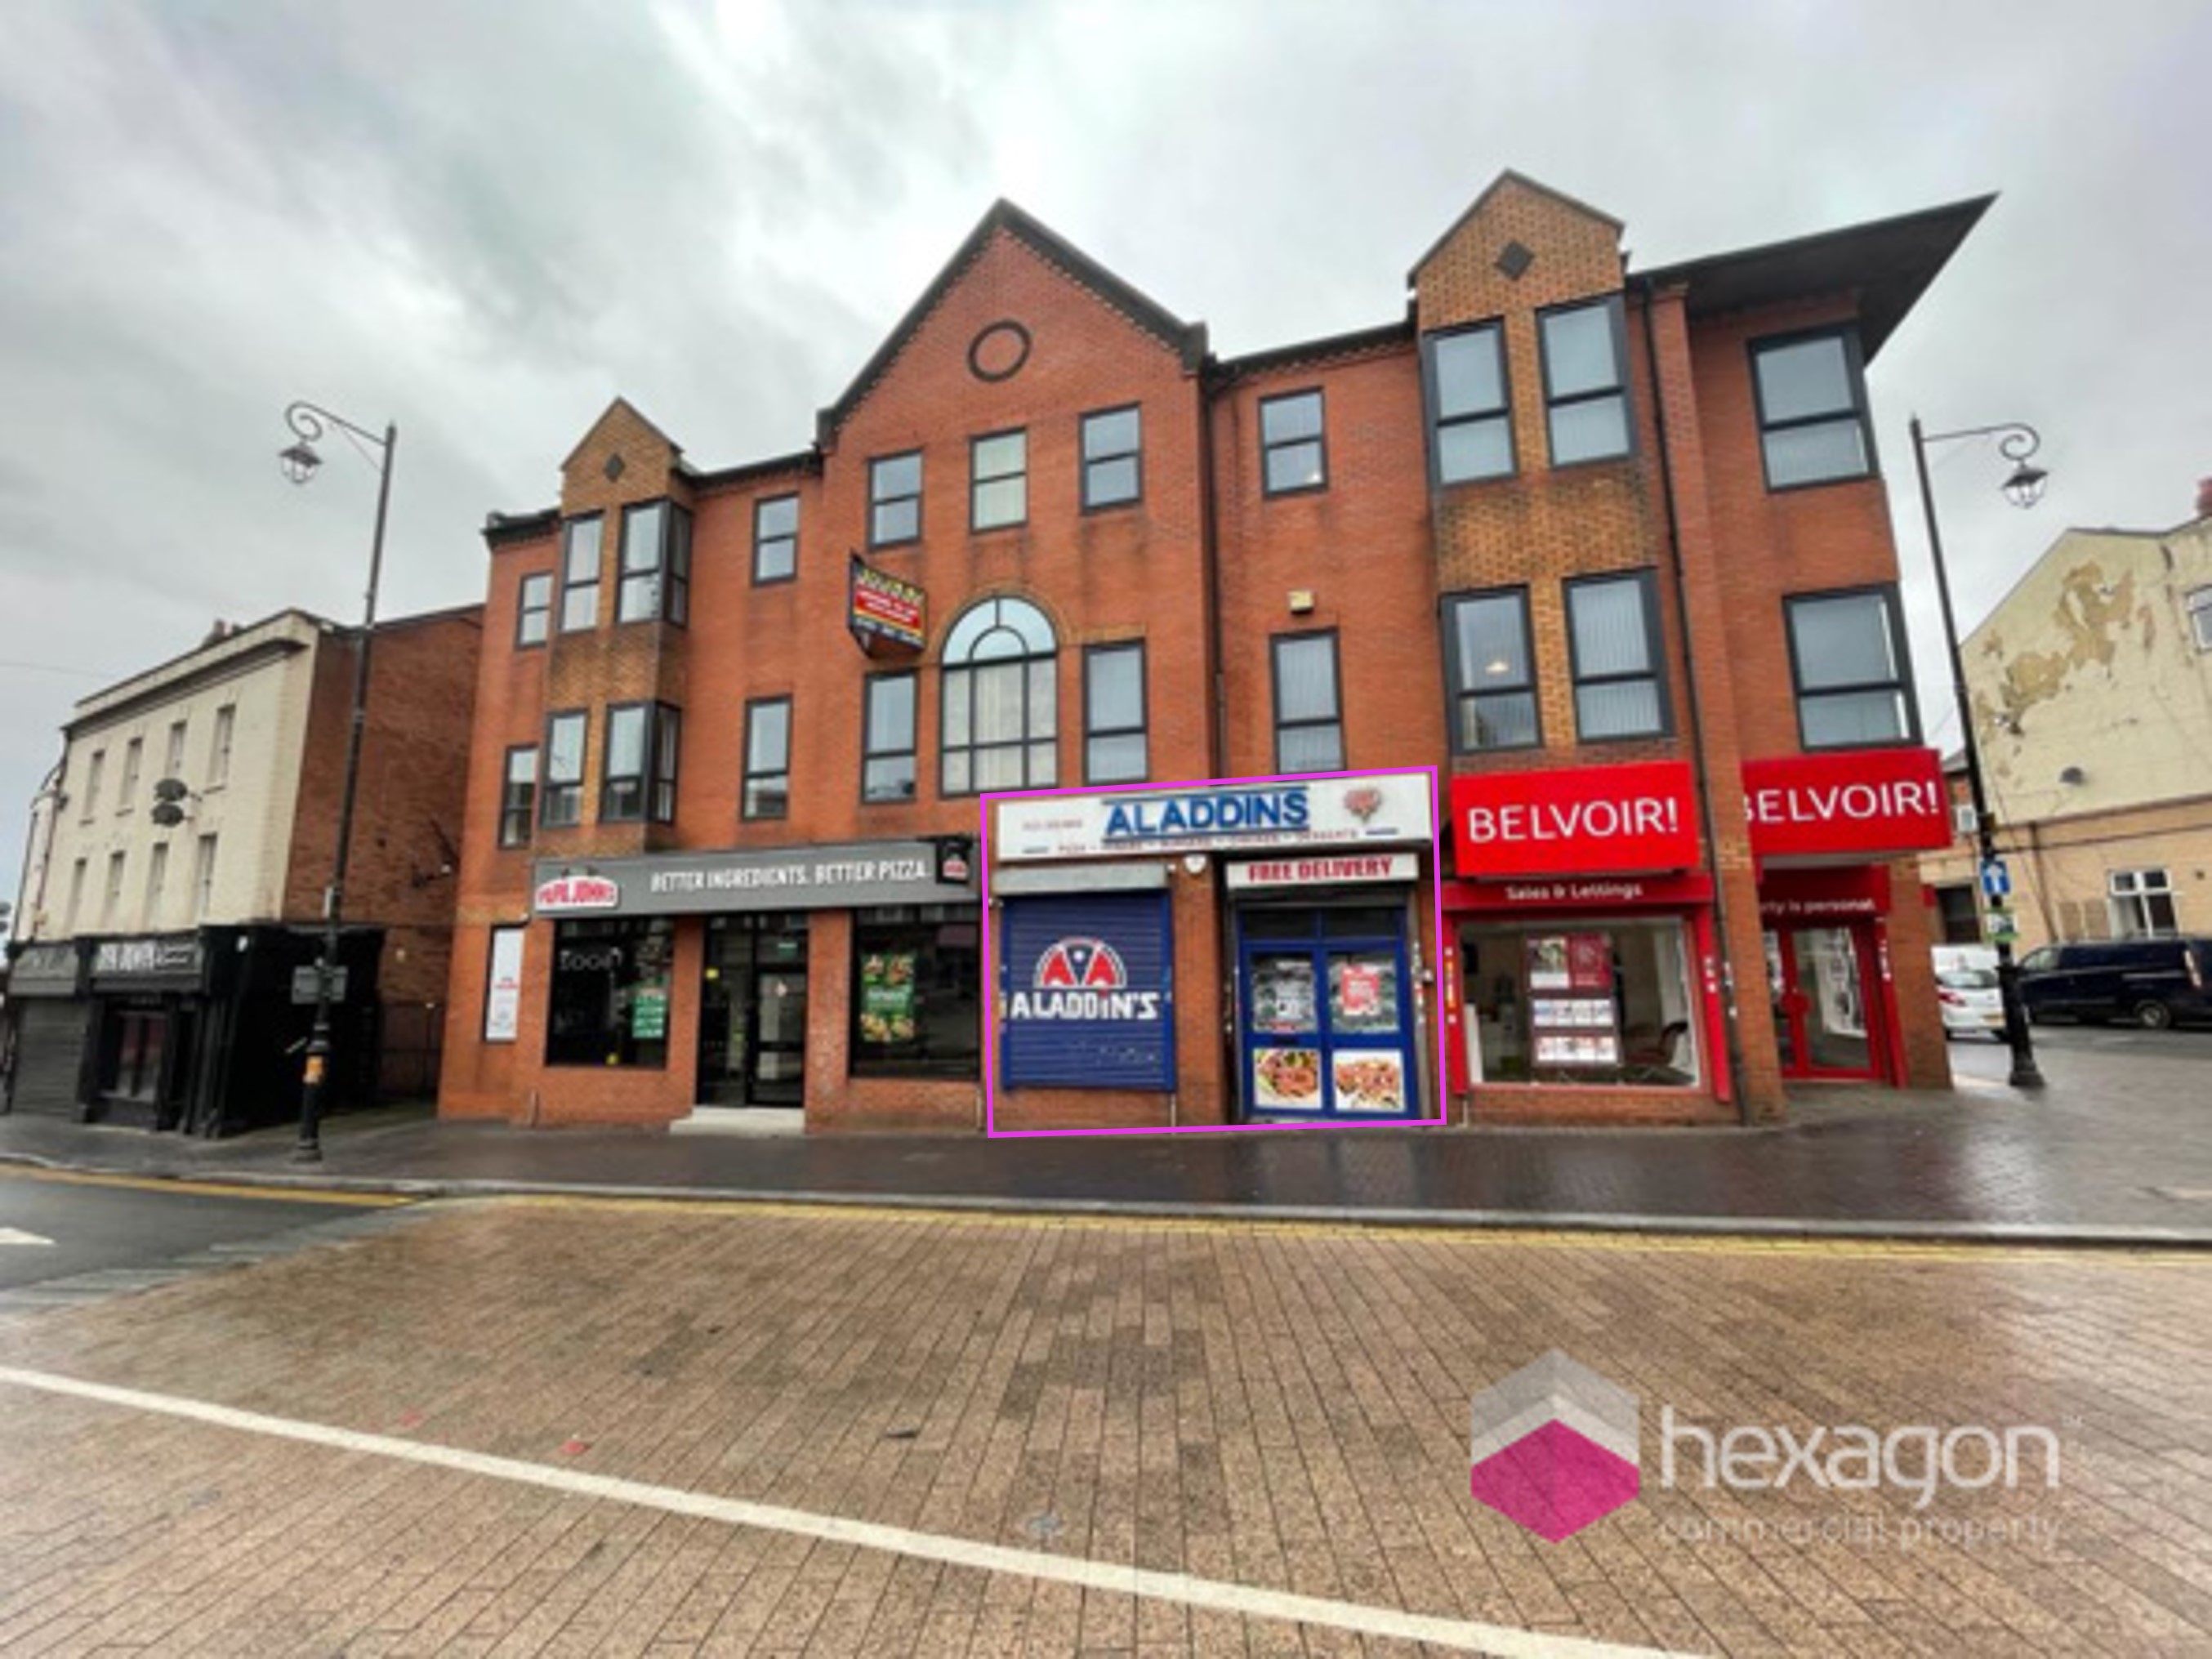 0 bed Retail Property (High Street) for rent in Wednesbury. From Hexagon Commercial Property